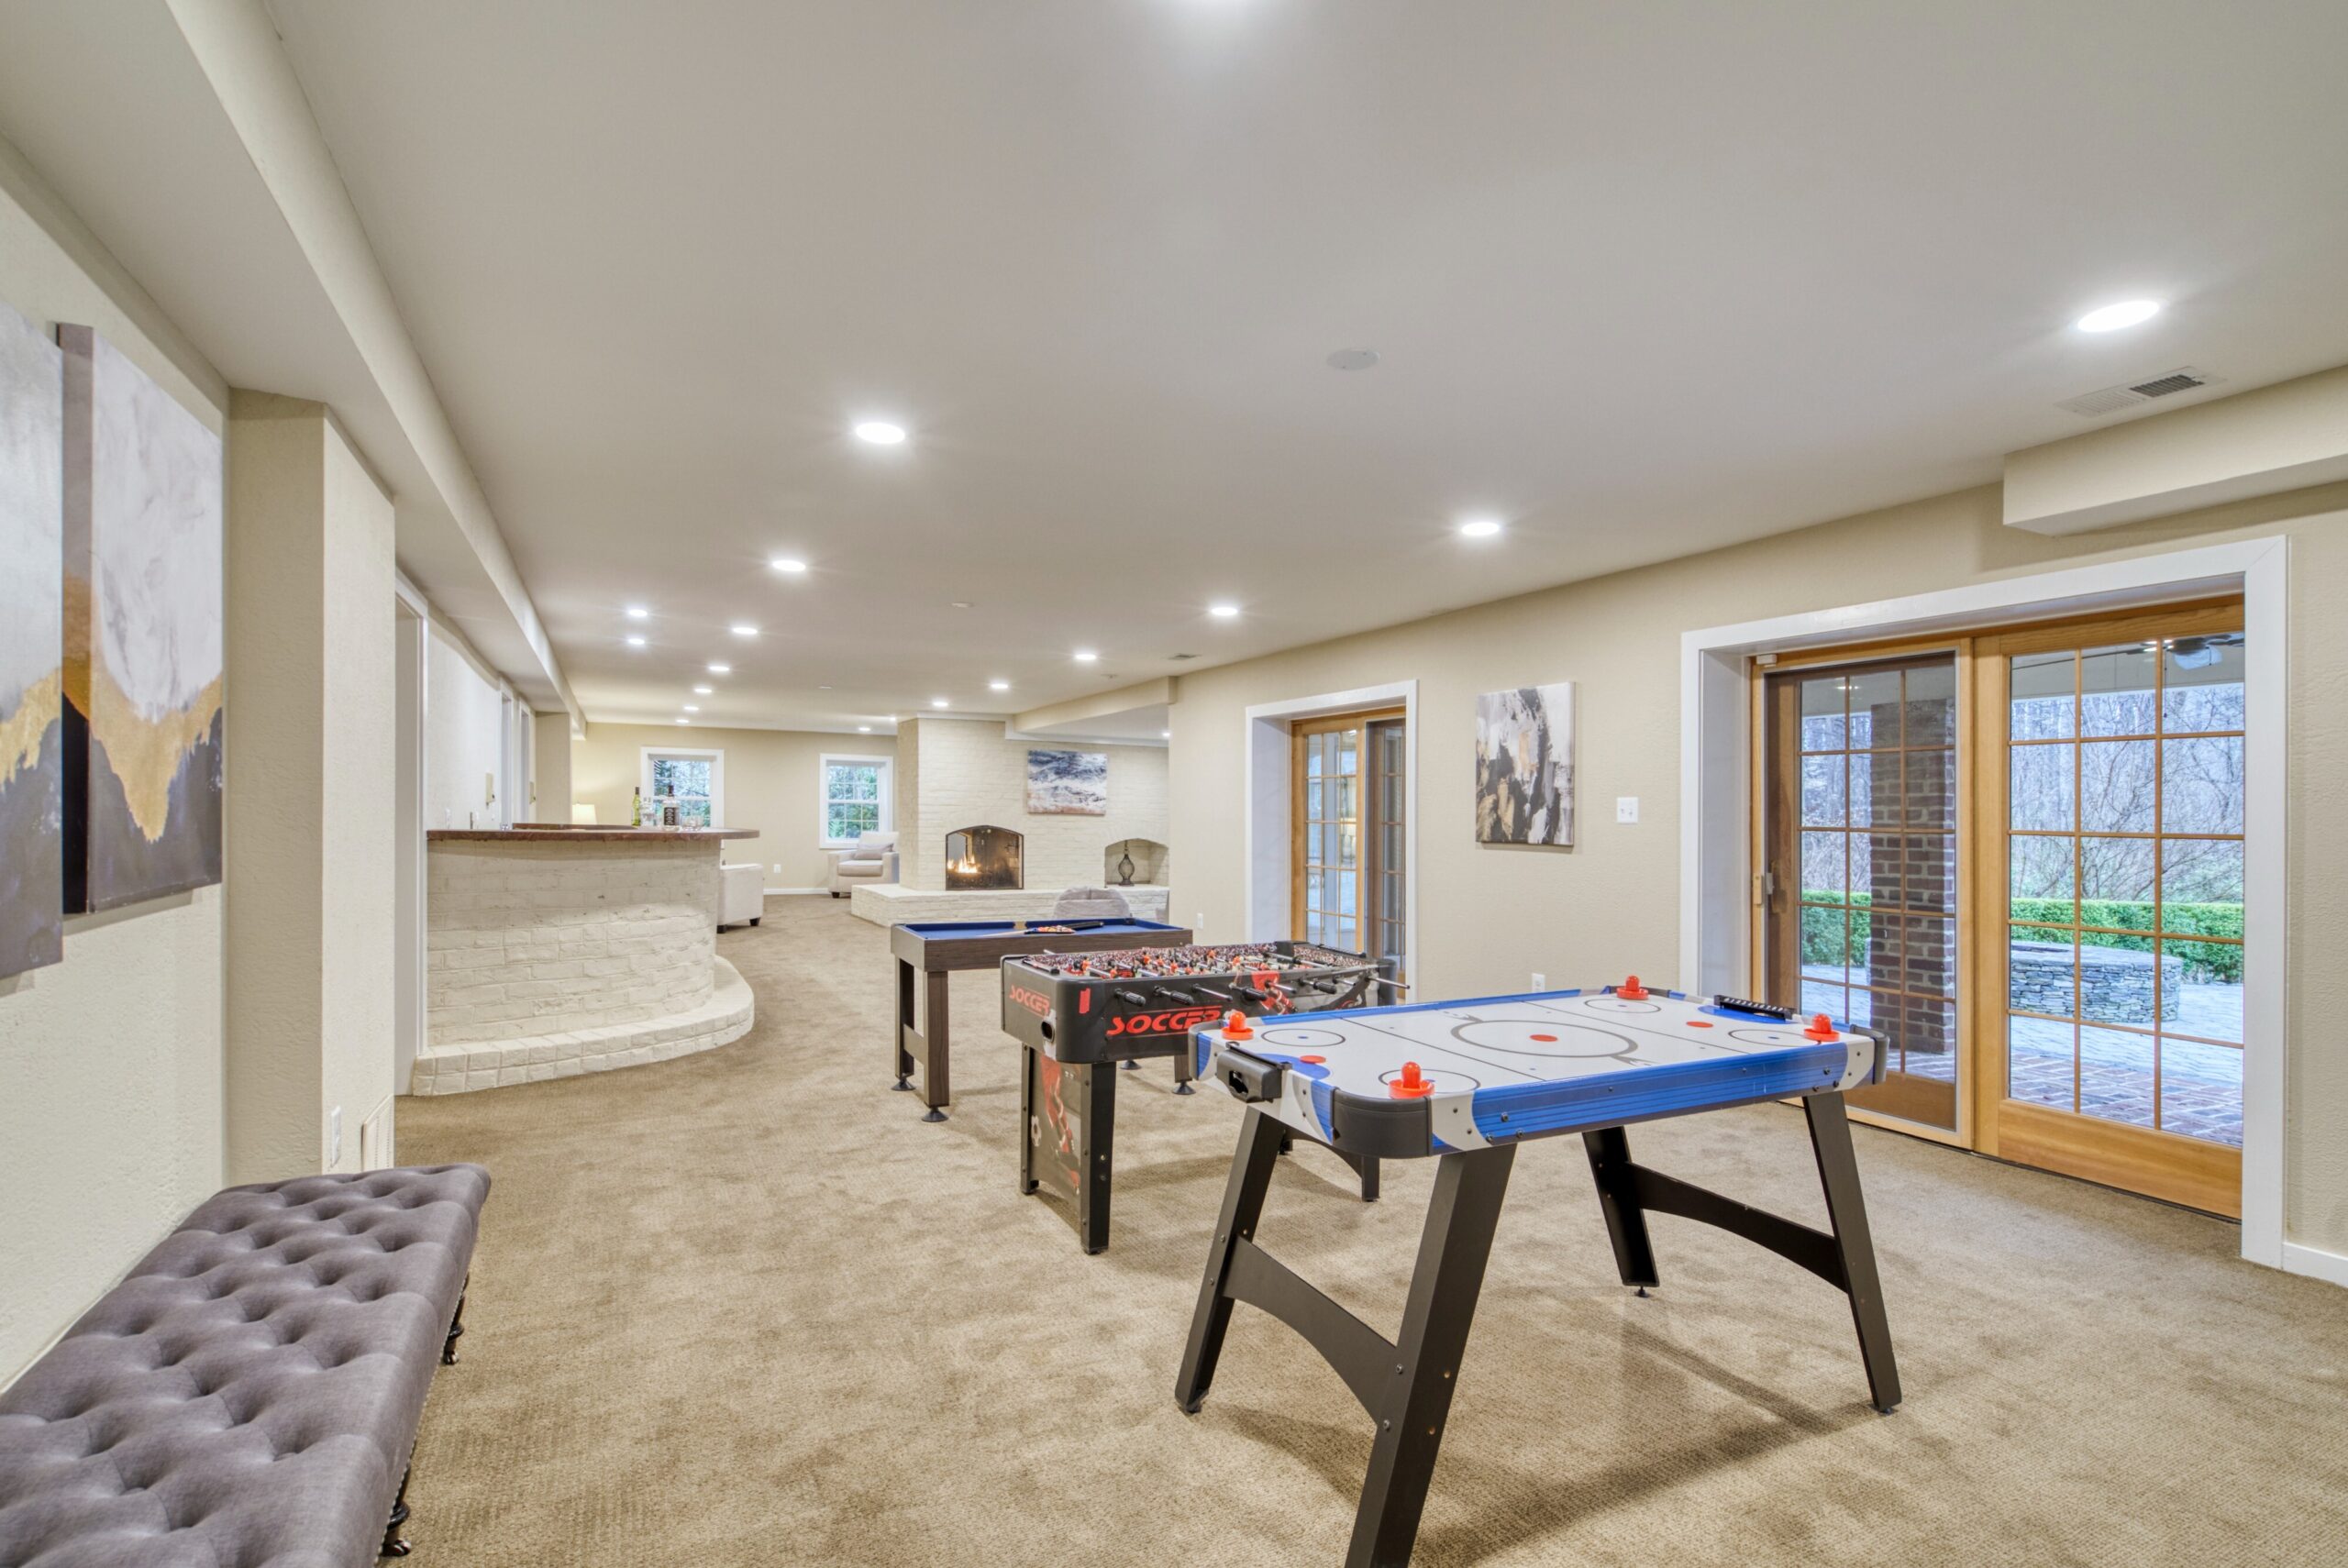 Professional interior photo of 718 Potomac Knolls Dr - showing the finished lower level with several areas to entertain looking out the doors to the backyard